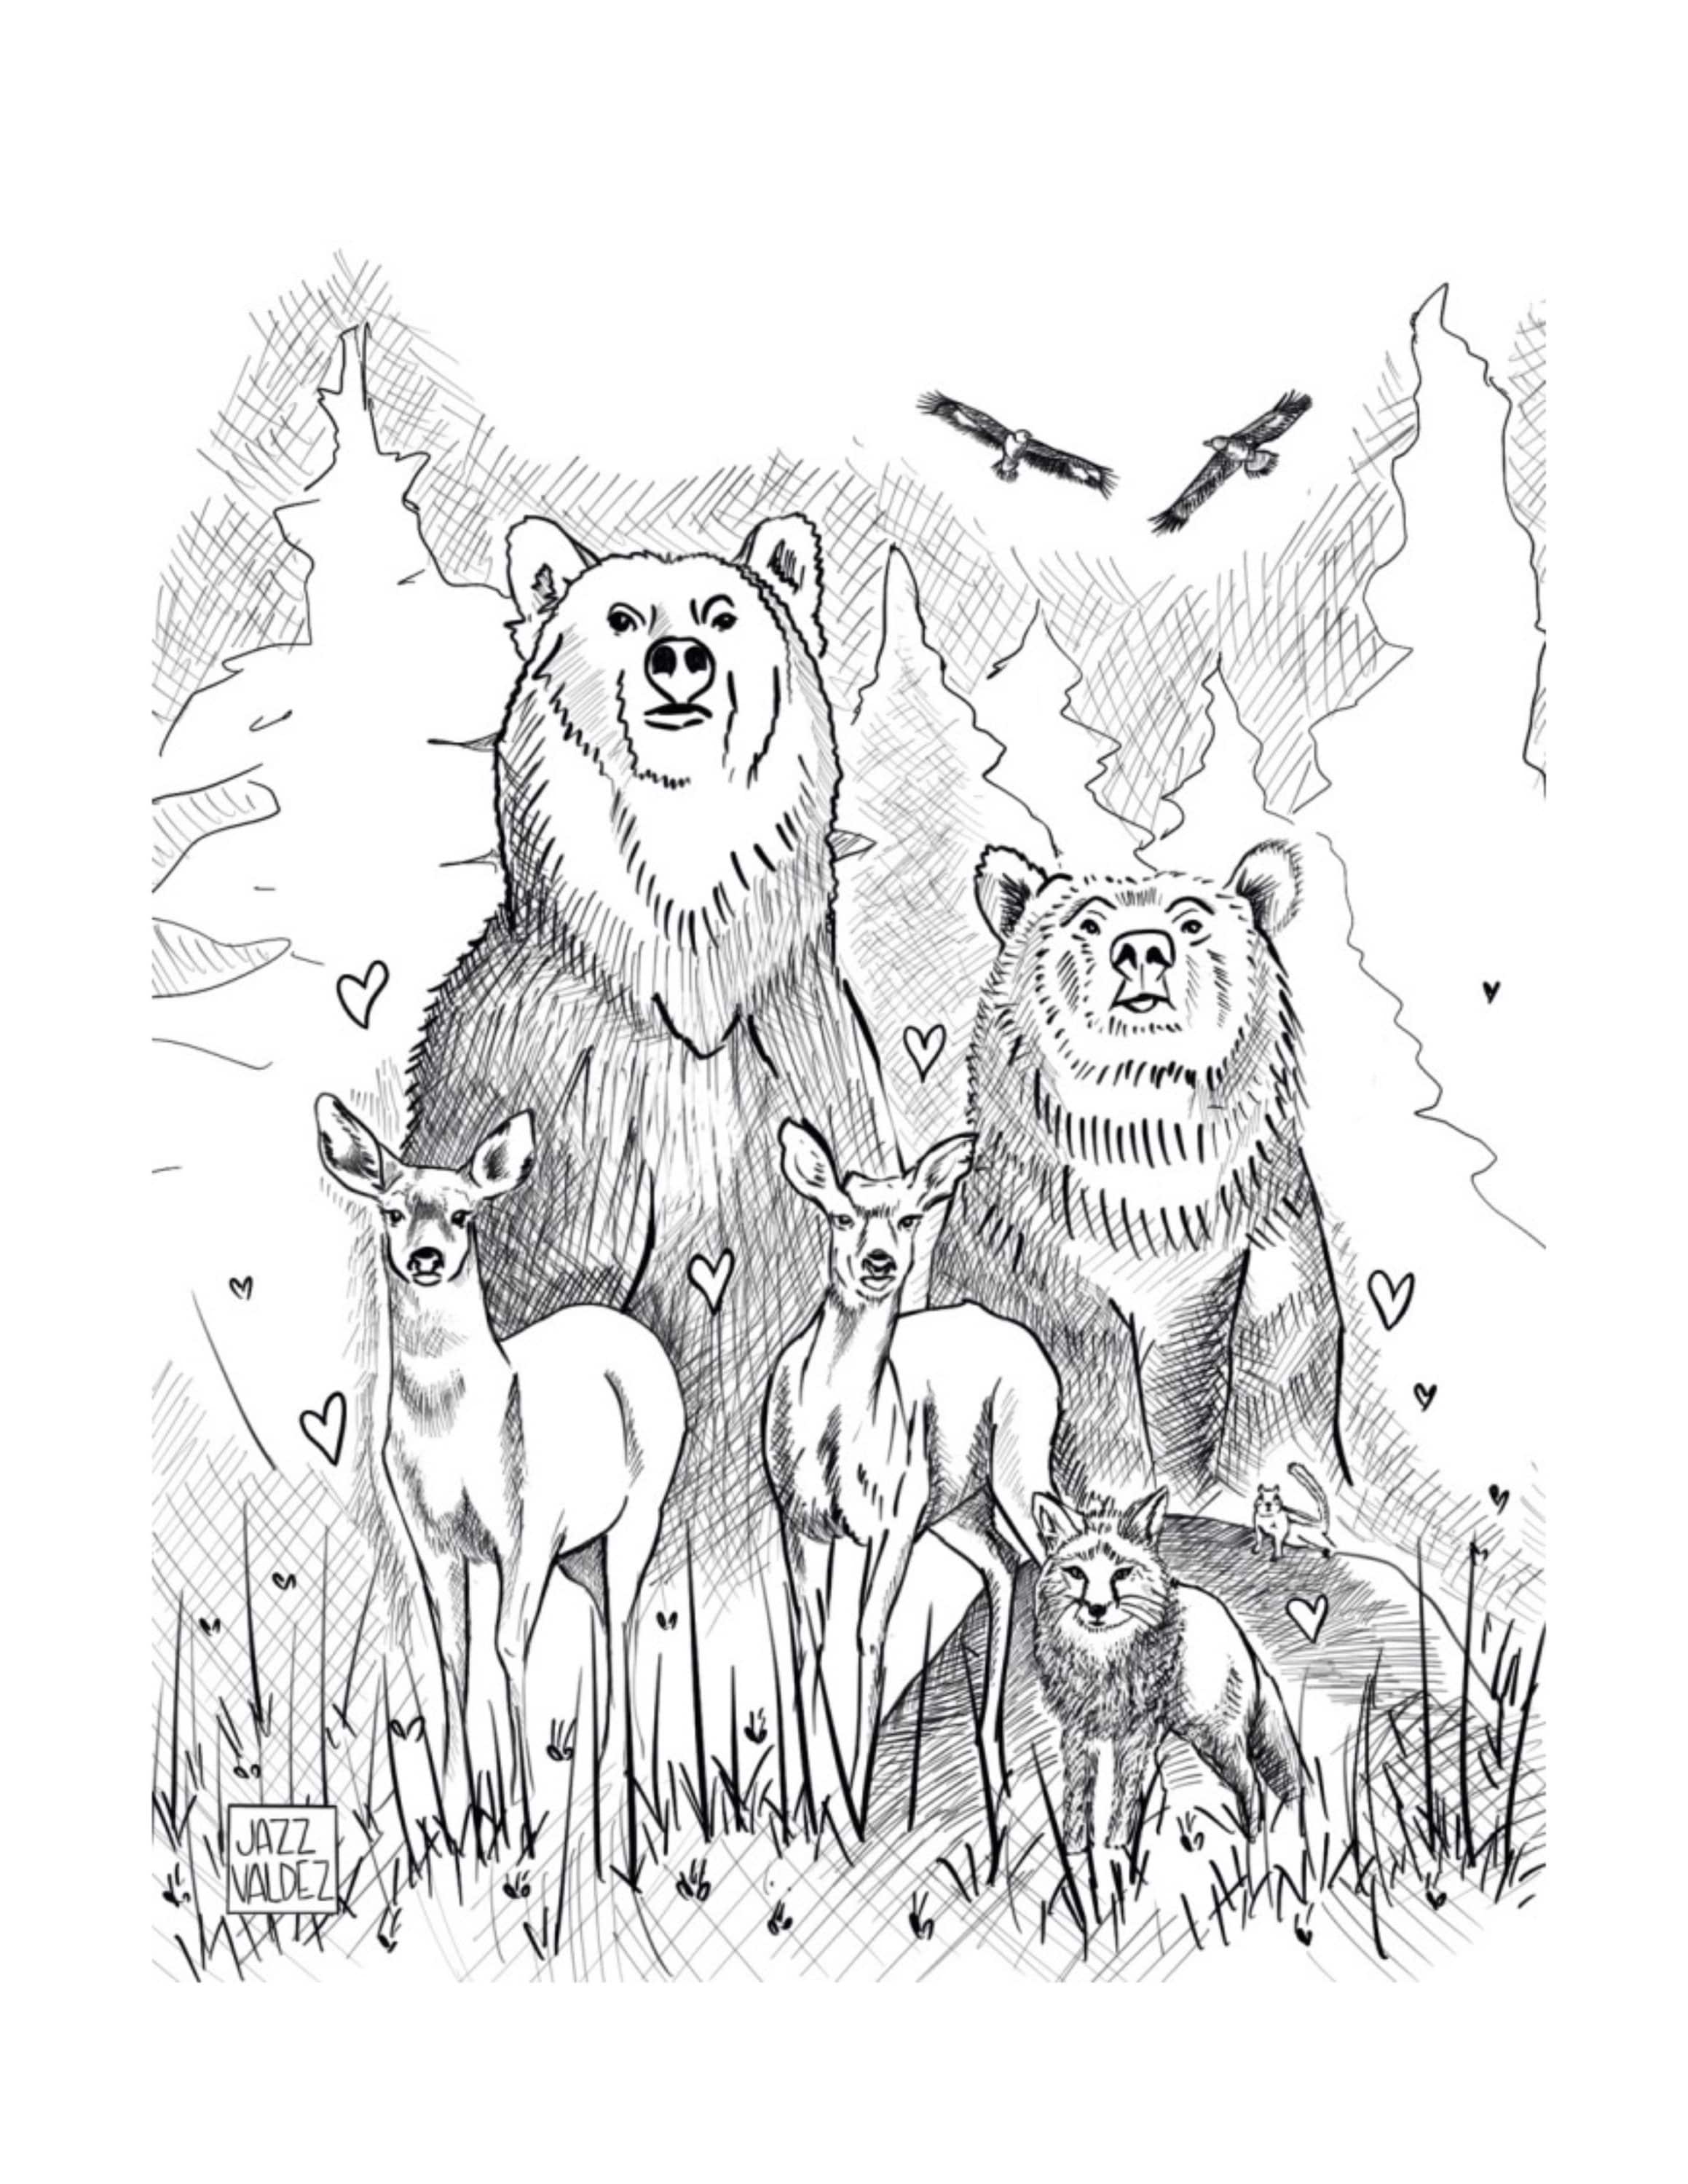 Bear deer fox forest animals of colorado coloring page printable illustration